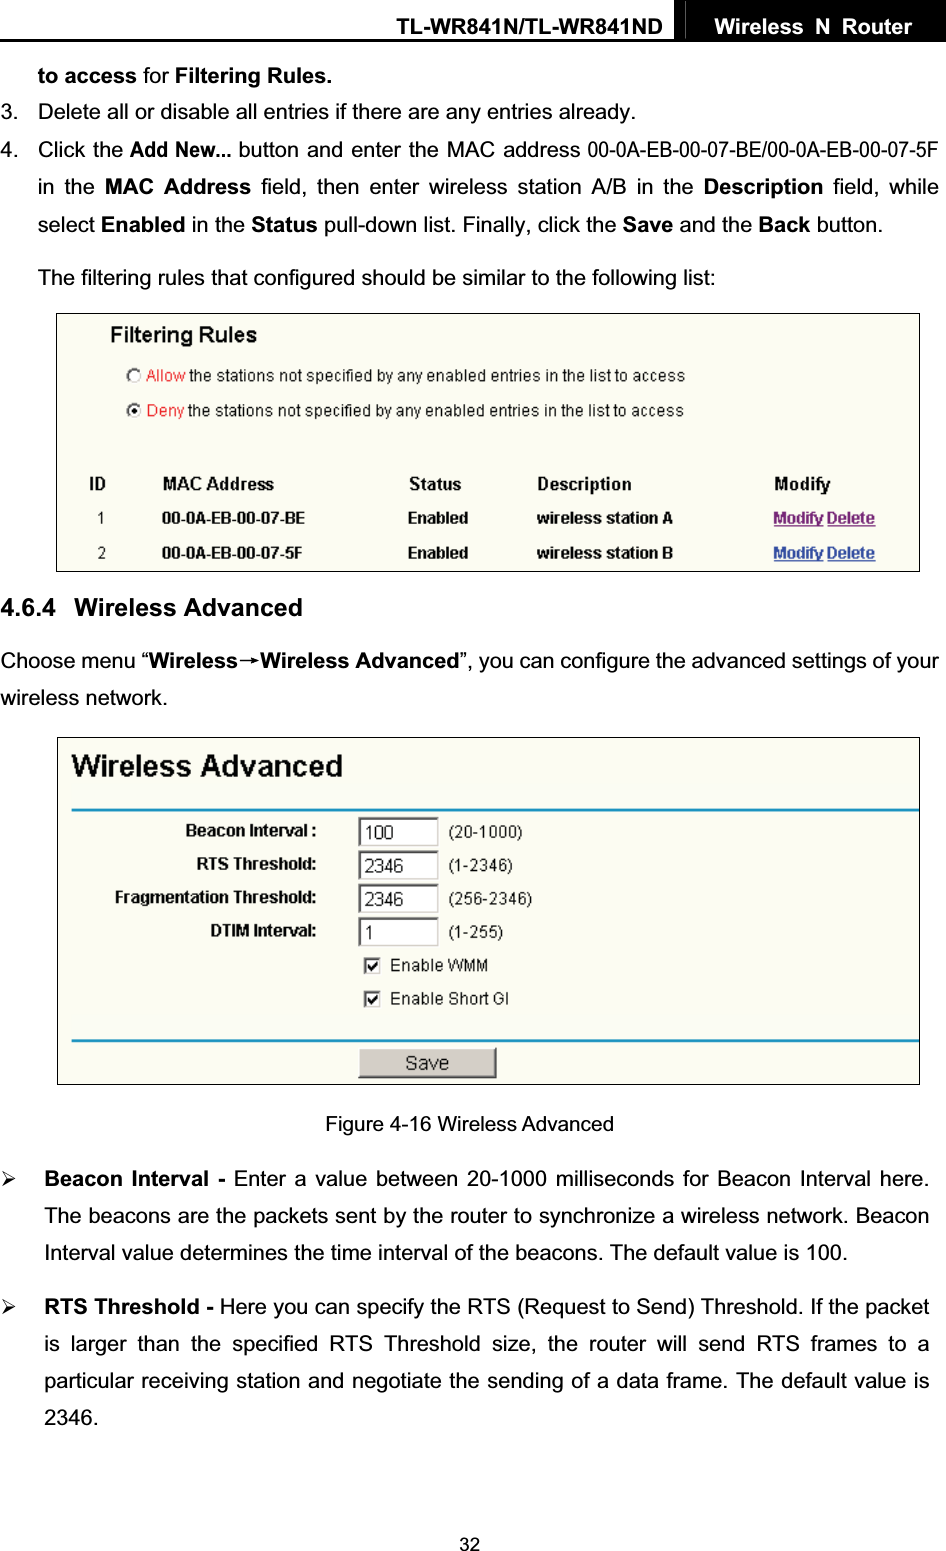 TL-WR841N/TL-WR841ND  Wireless N Router  32to access for Filtering Rules.3.  Delete all or disable all entries if there are any entries already. 4. Click theAdd New...button and enter the MAC address 00-0A-EB-00-07-BE/00-0A-EB-00-07-5F in the MAC Address field, then enter wireless station A/B in the Description field, while select Enabled in the Status pull-down list. Finally, click the Save and the Back button. The filtering rules that configured should be similar to the following list:   4.6.4 Wireless Advanced Choose menu “WirelessėWireless Advanced”, you can configure the advanced settings of your wireless network. Figure 4-16 Wireless Advanced ¾Beacon Interval - Enter a value between 20-1000 milliseconds for Beacon Interval here. The beacons are the packets sent by the router to synchronize a wireless network. Beacon Interval value determines the time interval of the beacons. The default value is 100.   ¾RTS Threshold - Here you can specify the RTS (Request to Send) Threshold. If the packet is larger than the specified RTS Threshold size, the router will send RTS frames to a particular receiving station and negotiate the sending of a data frame. The default value is 2346.